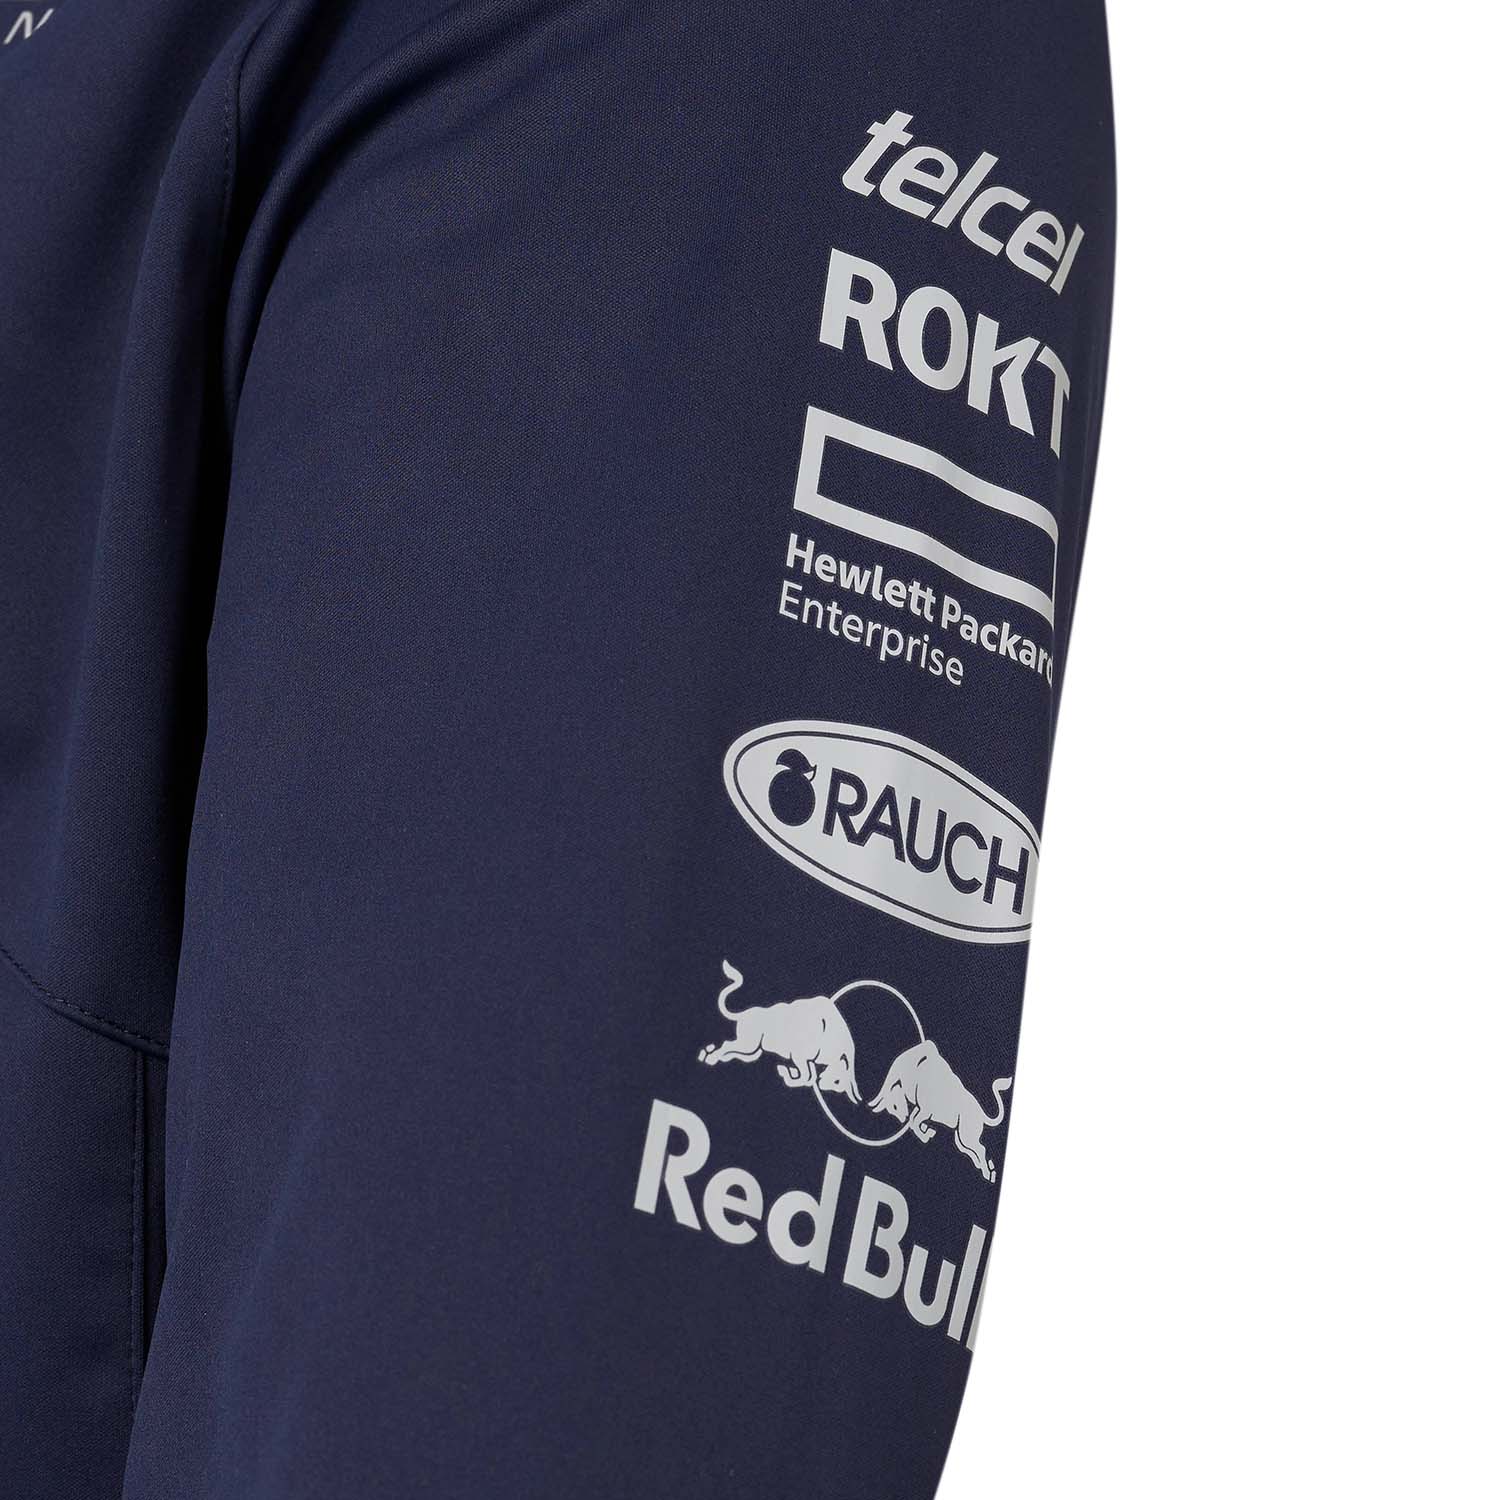 2023 Vegas Special Edition Team Softshell Jacket - Red Bull Racing - Fueler store